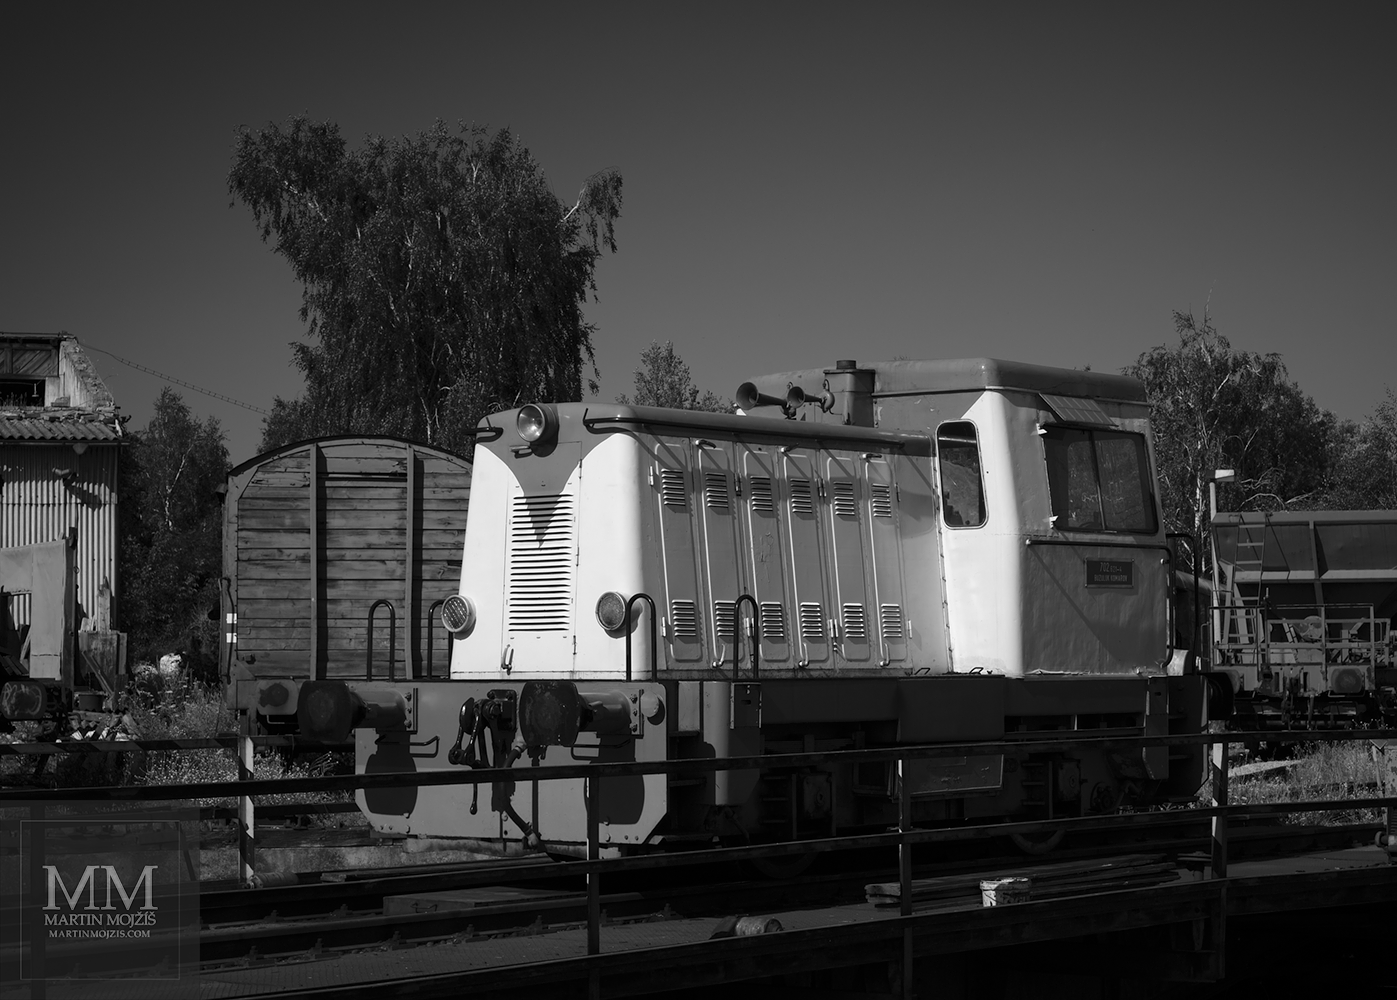 A small diesel locomotive 702 621-4 by Buzuluk Komarov standing on a turntable. Black and white fine art photograph REST IN THE MIDDLE OF SUMMER II., photographed by Martin Mojzis.